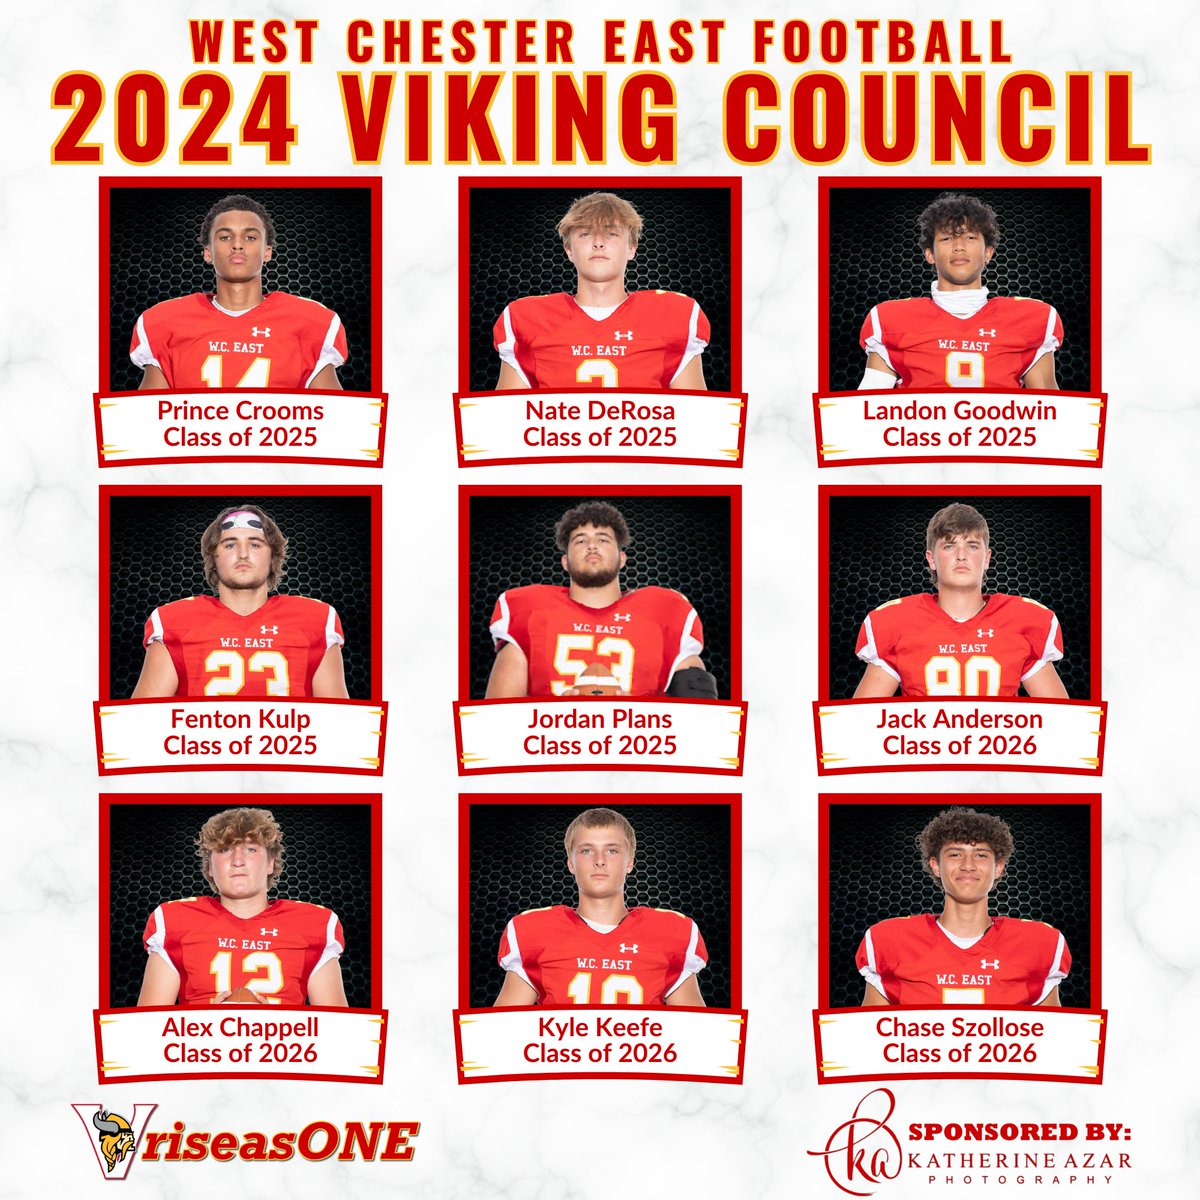 ⚓️Congrats to our 2024 Viking Council⚓️

We are excited for you all to lead our team and program on the field, in the school  and in the community! #vikingpride #riseasONE 

@FugettFootball @WestChesterASD @DubCsports @SportsByBLinder @EPAFootball @PaFootballNews @CaryMoyer